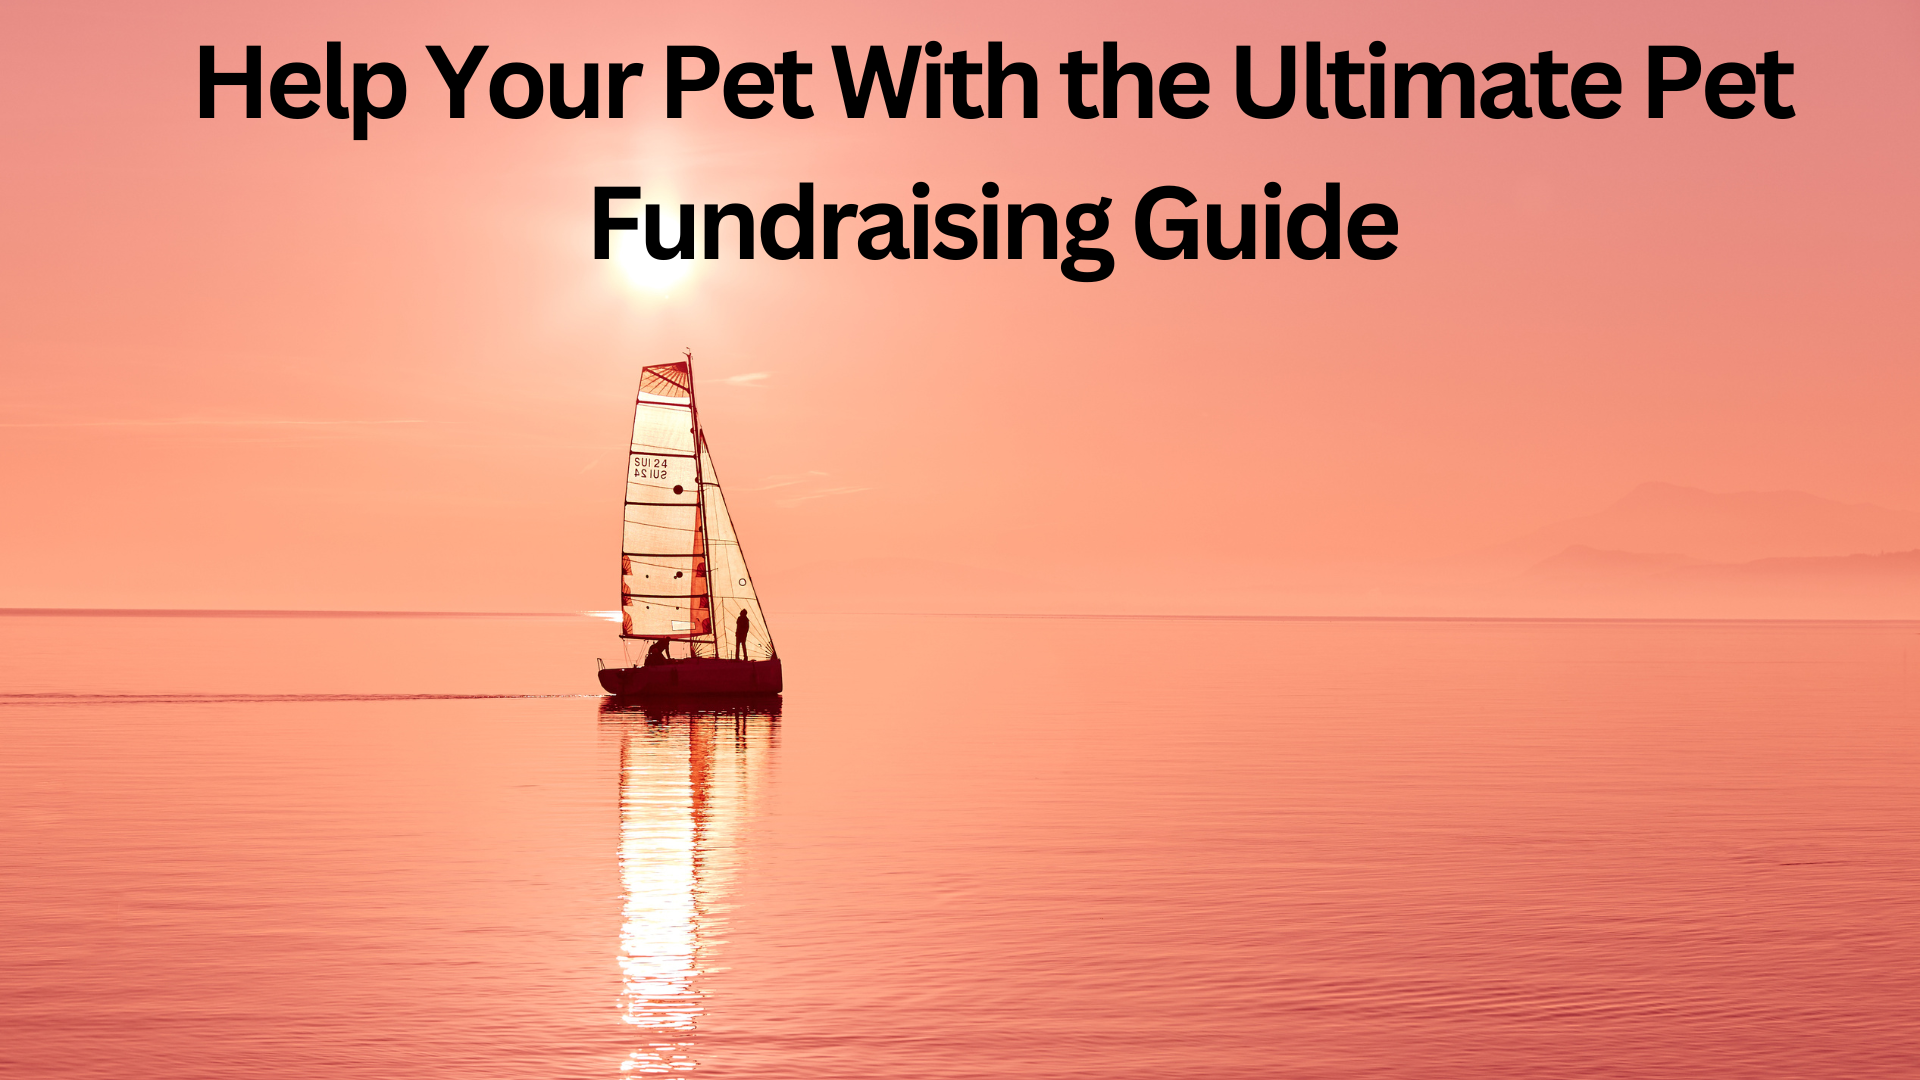 Help Your Pet With the Ultimate Pet Fundraising Guide